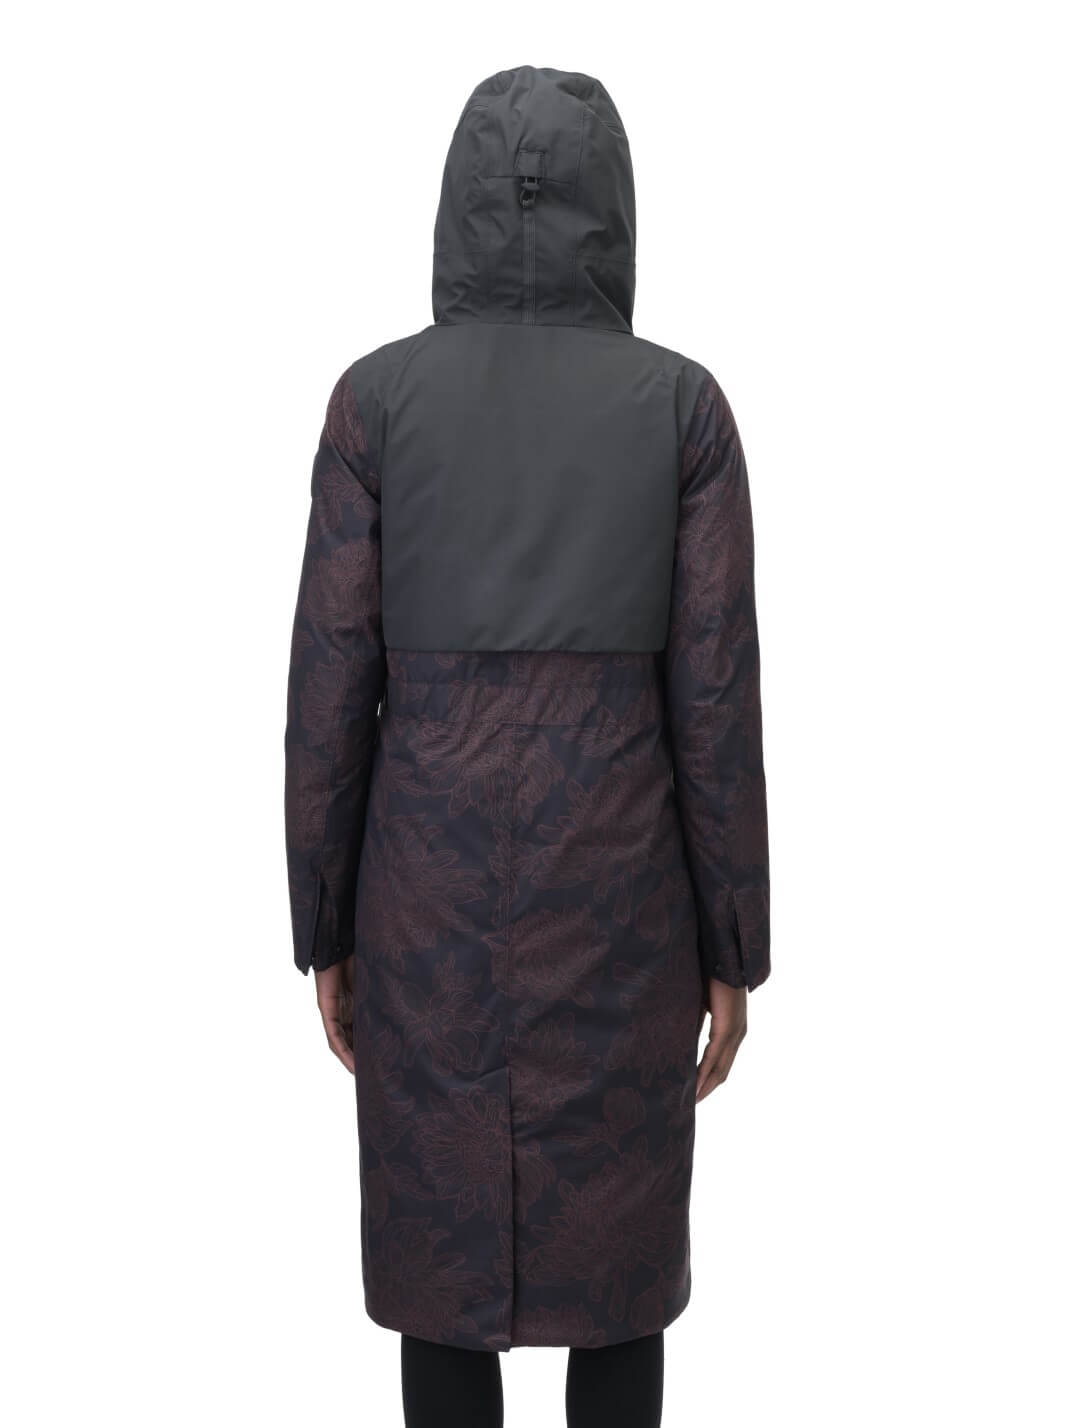 Iris Ladies Long Parka in below the knee length, Canadian duck down insulation, non-removable hood, and two-way zipper, in Dark Floral